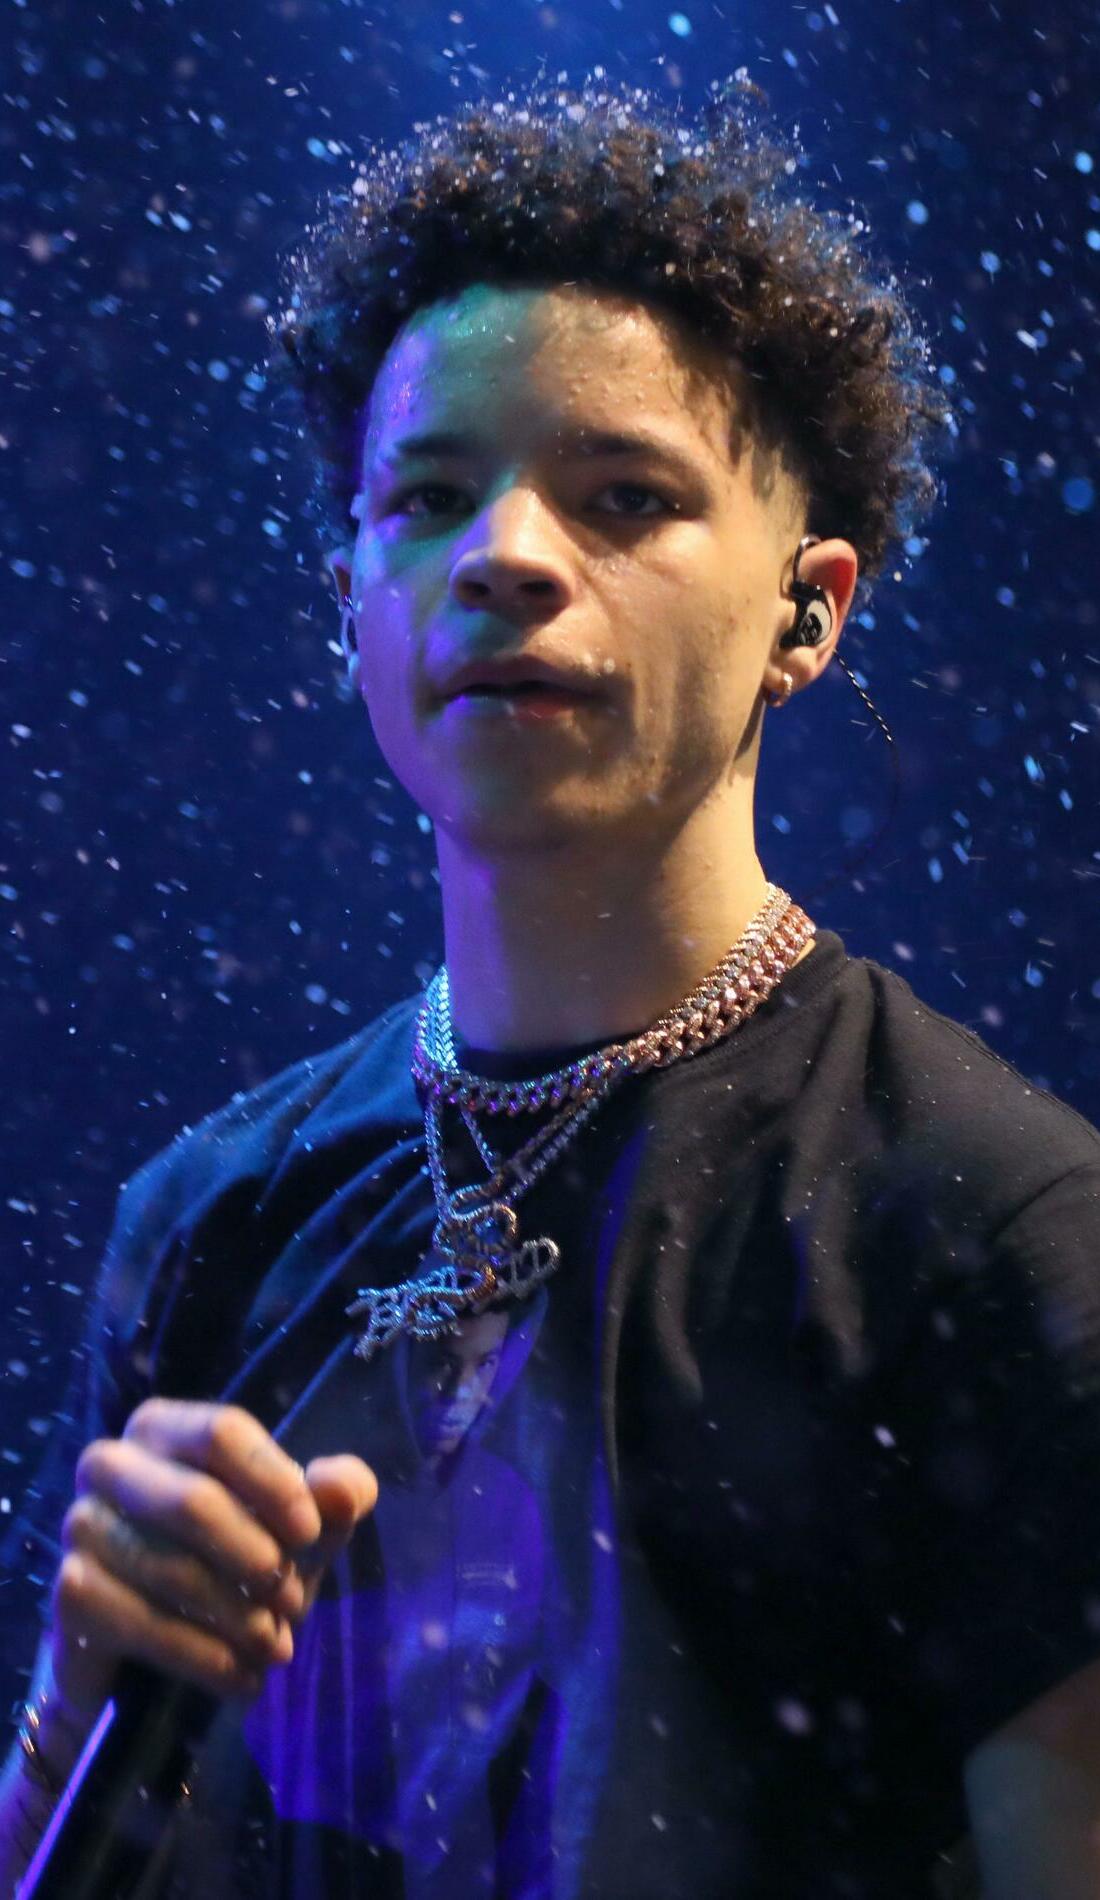 A Lil Mosey live event